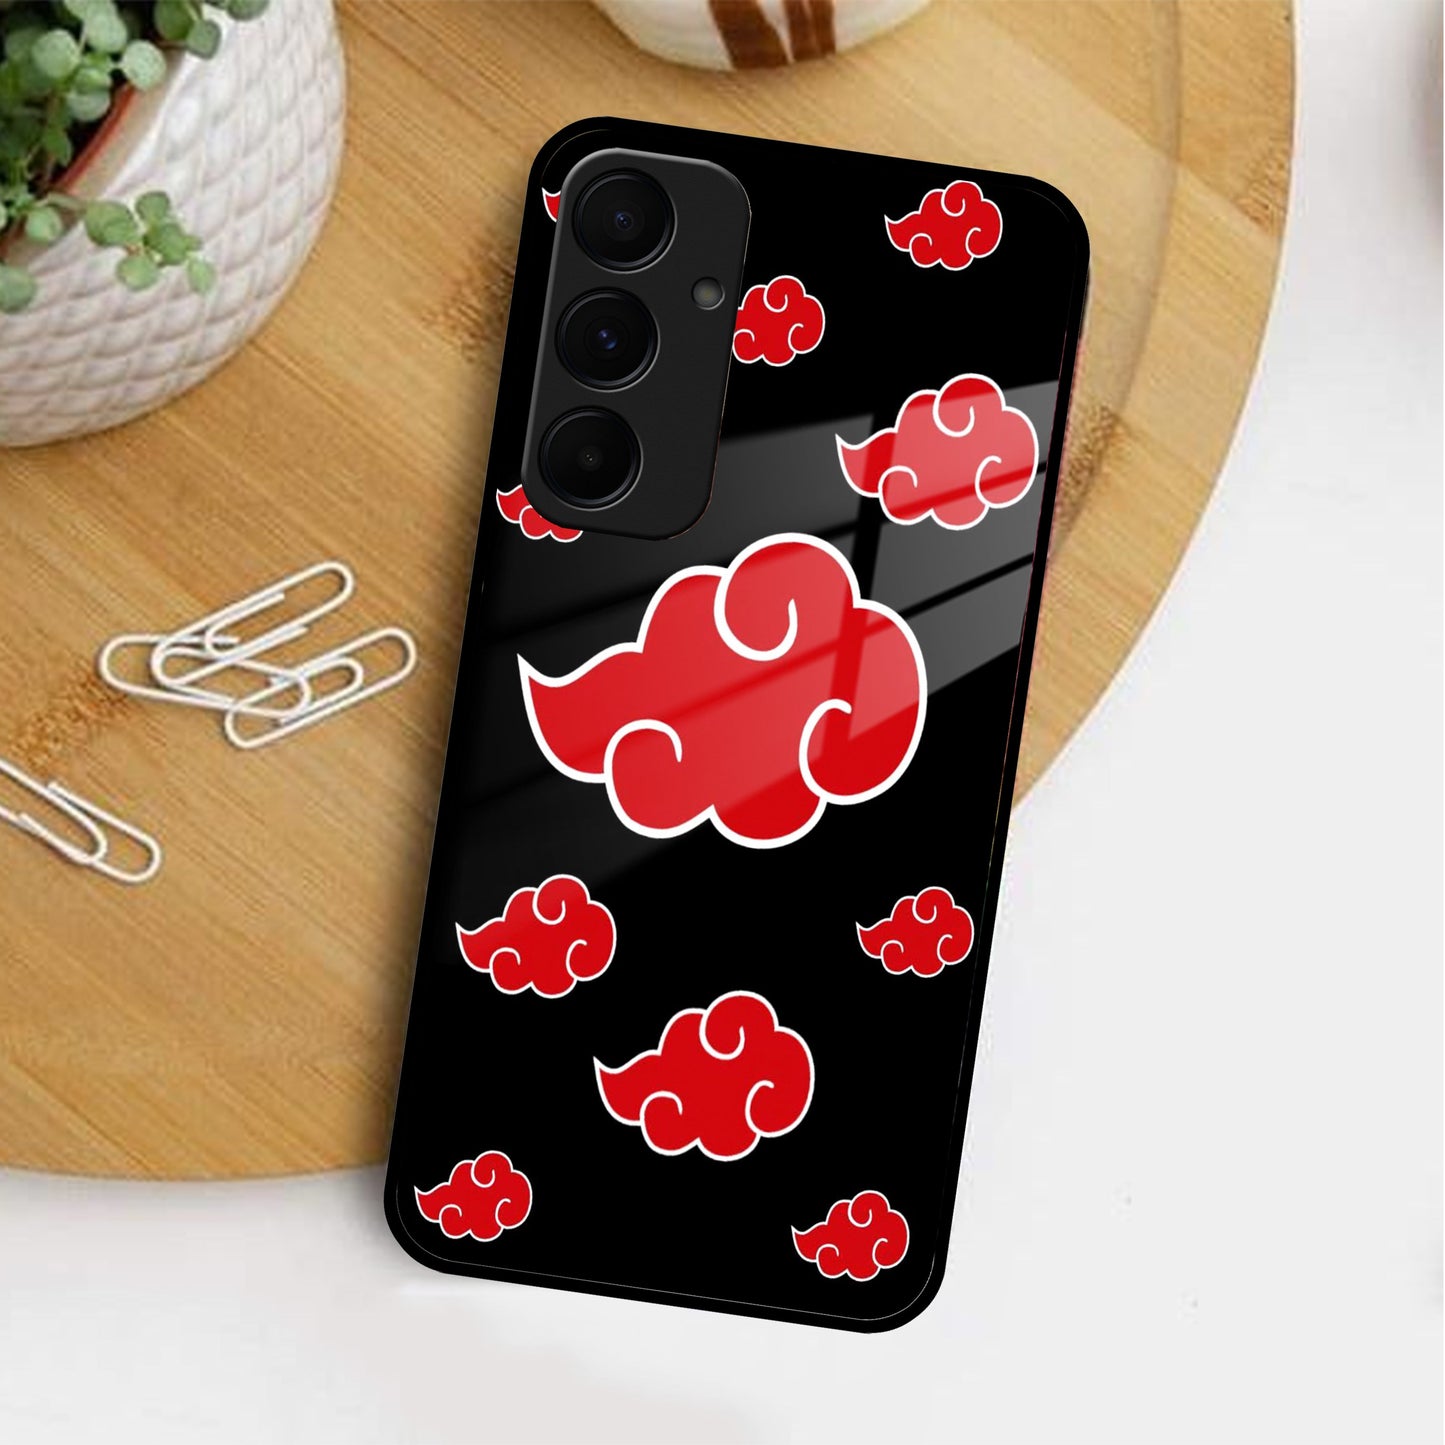 Red Cloud Mobile Glass Phone Case Cover For Samsung